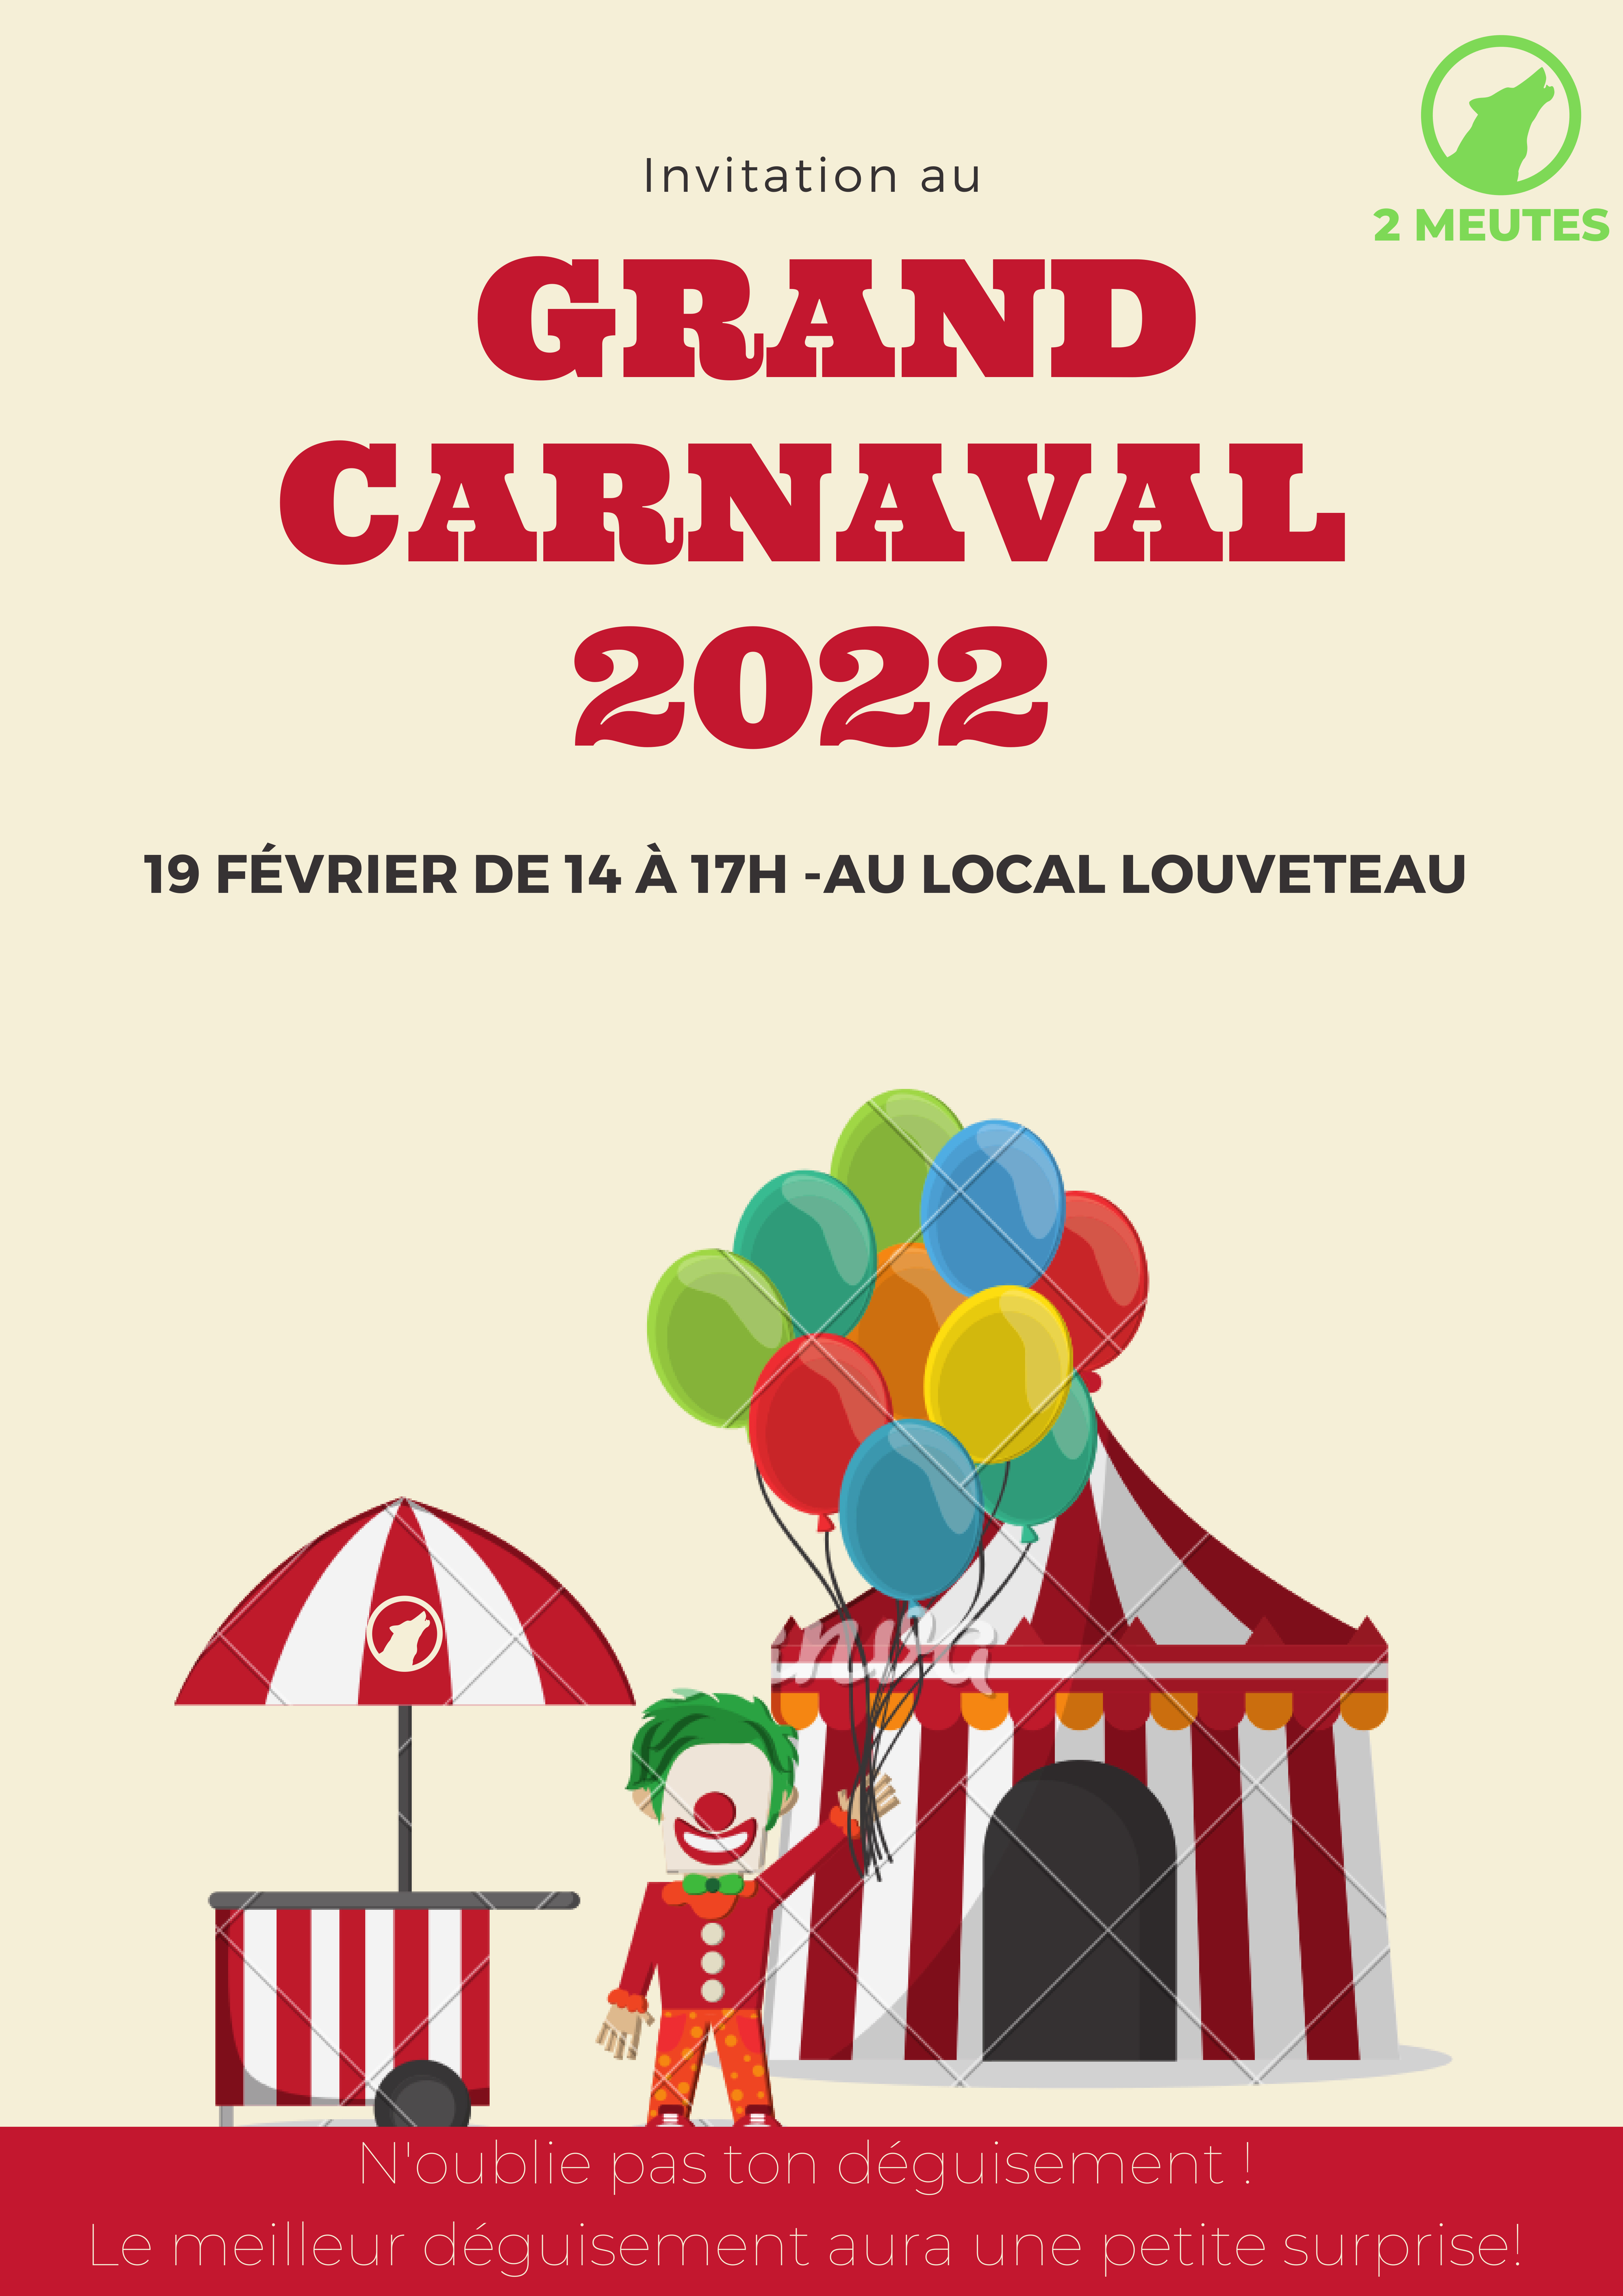 The-Grand-Carnaval-2022